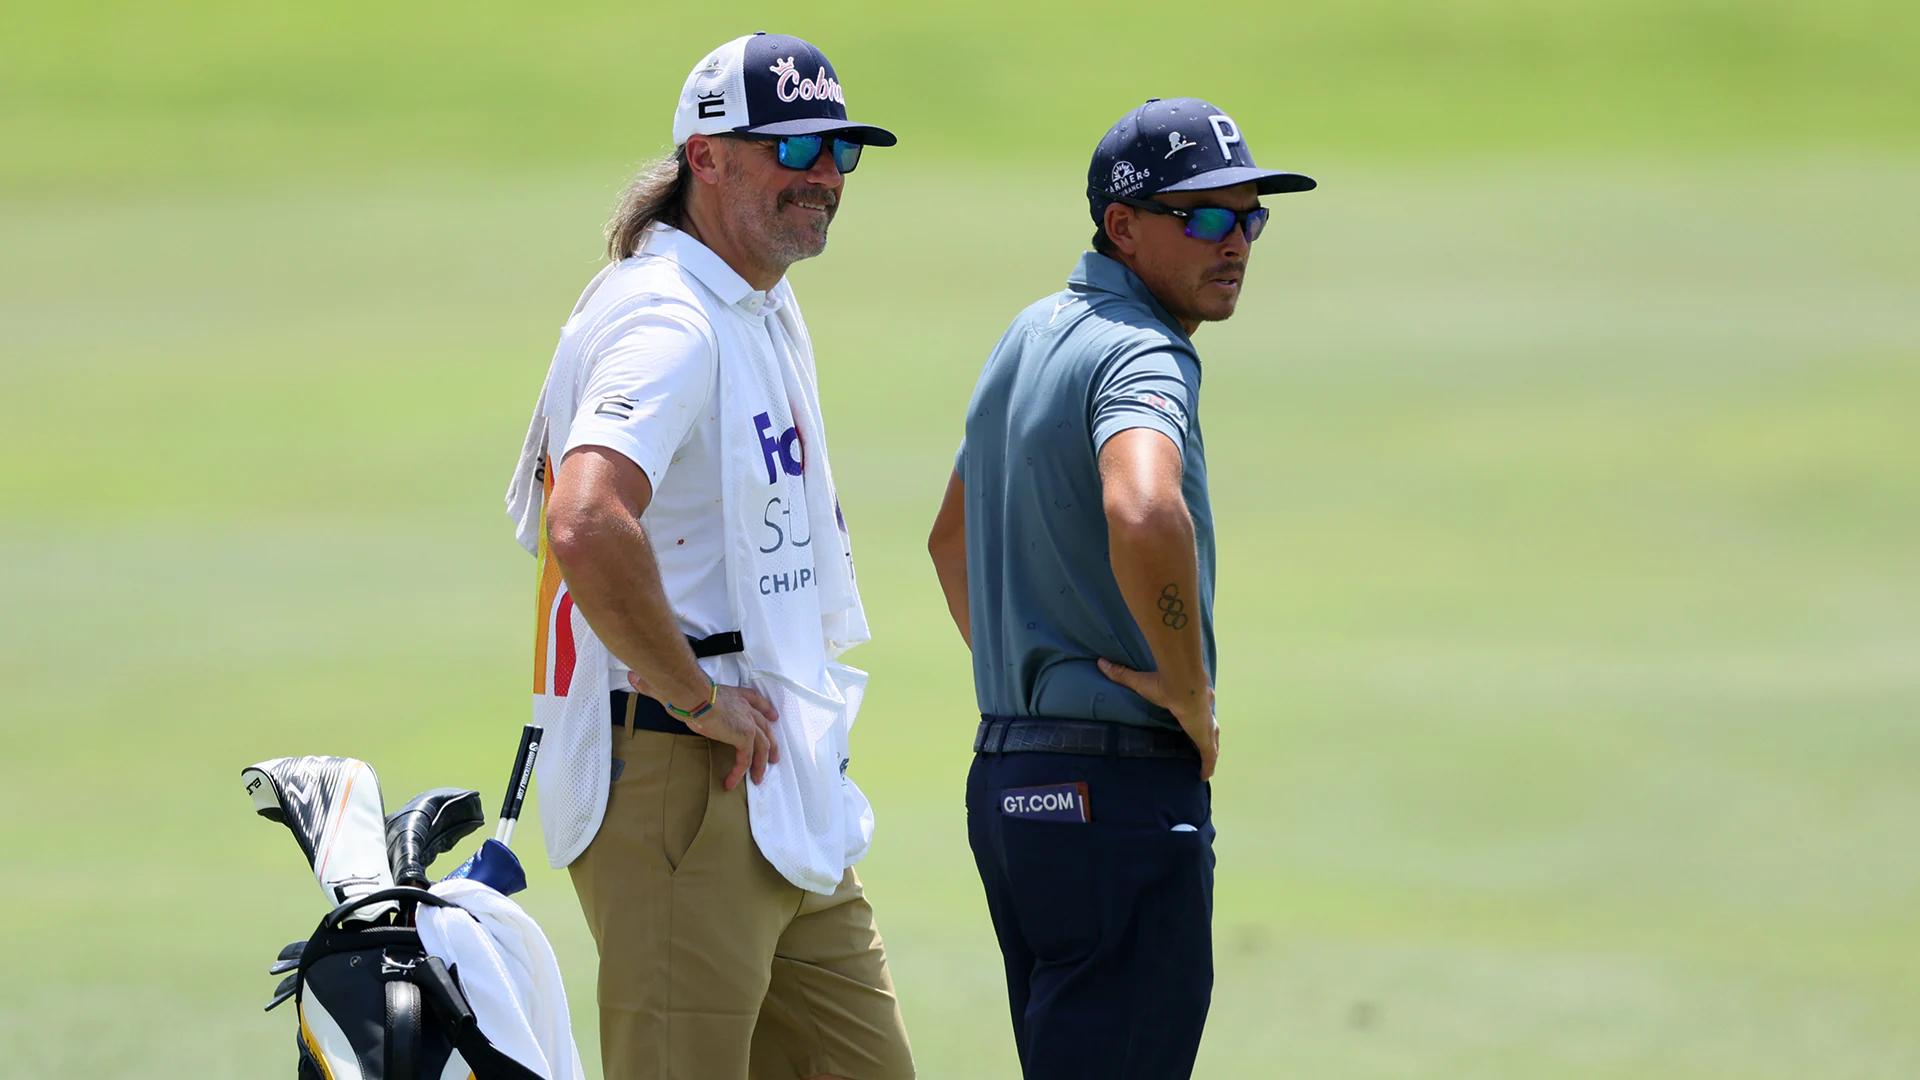 Rickie Fowler’s playoffs all but over after closing quintuple bogey